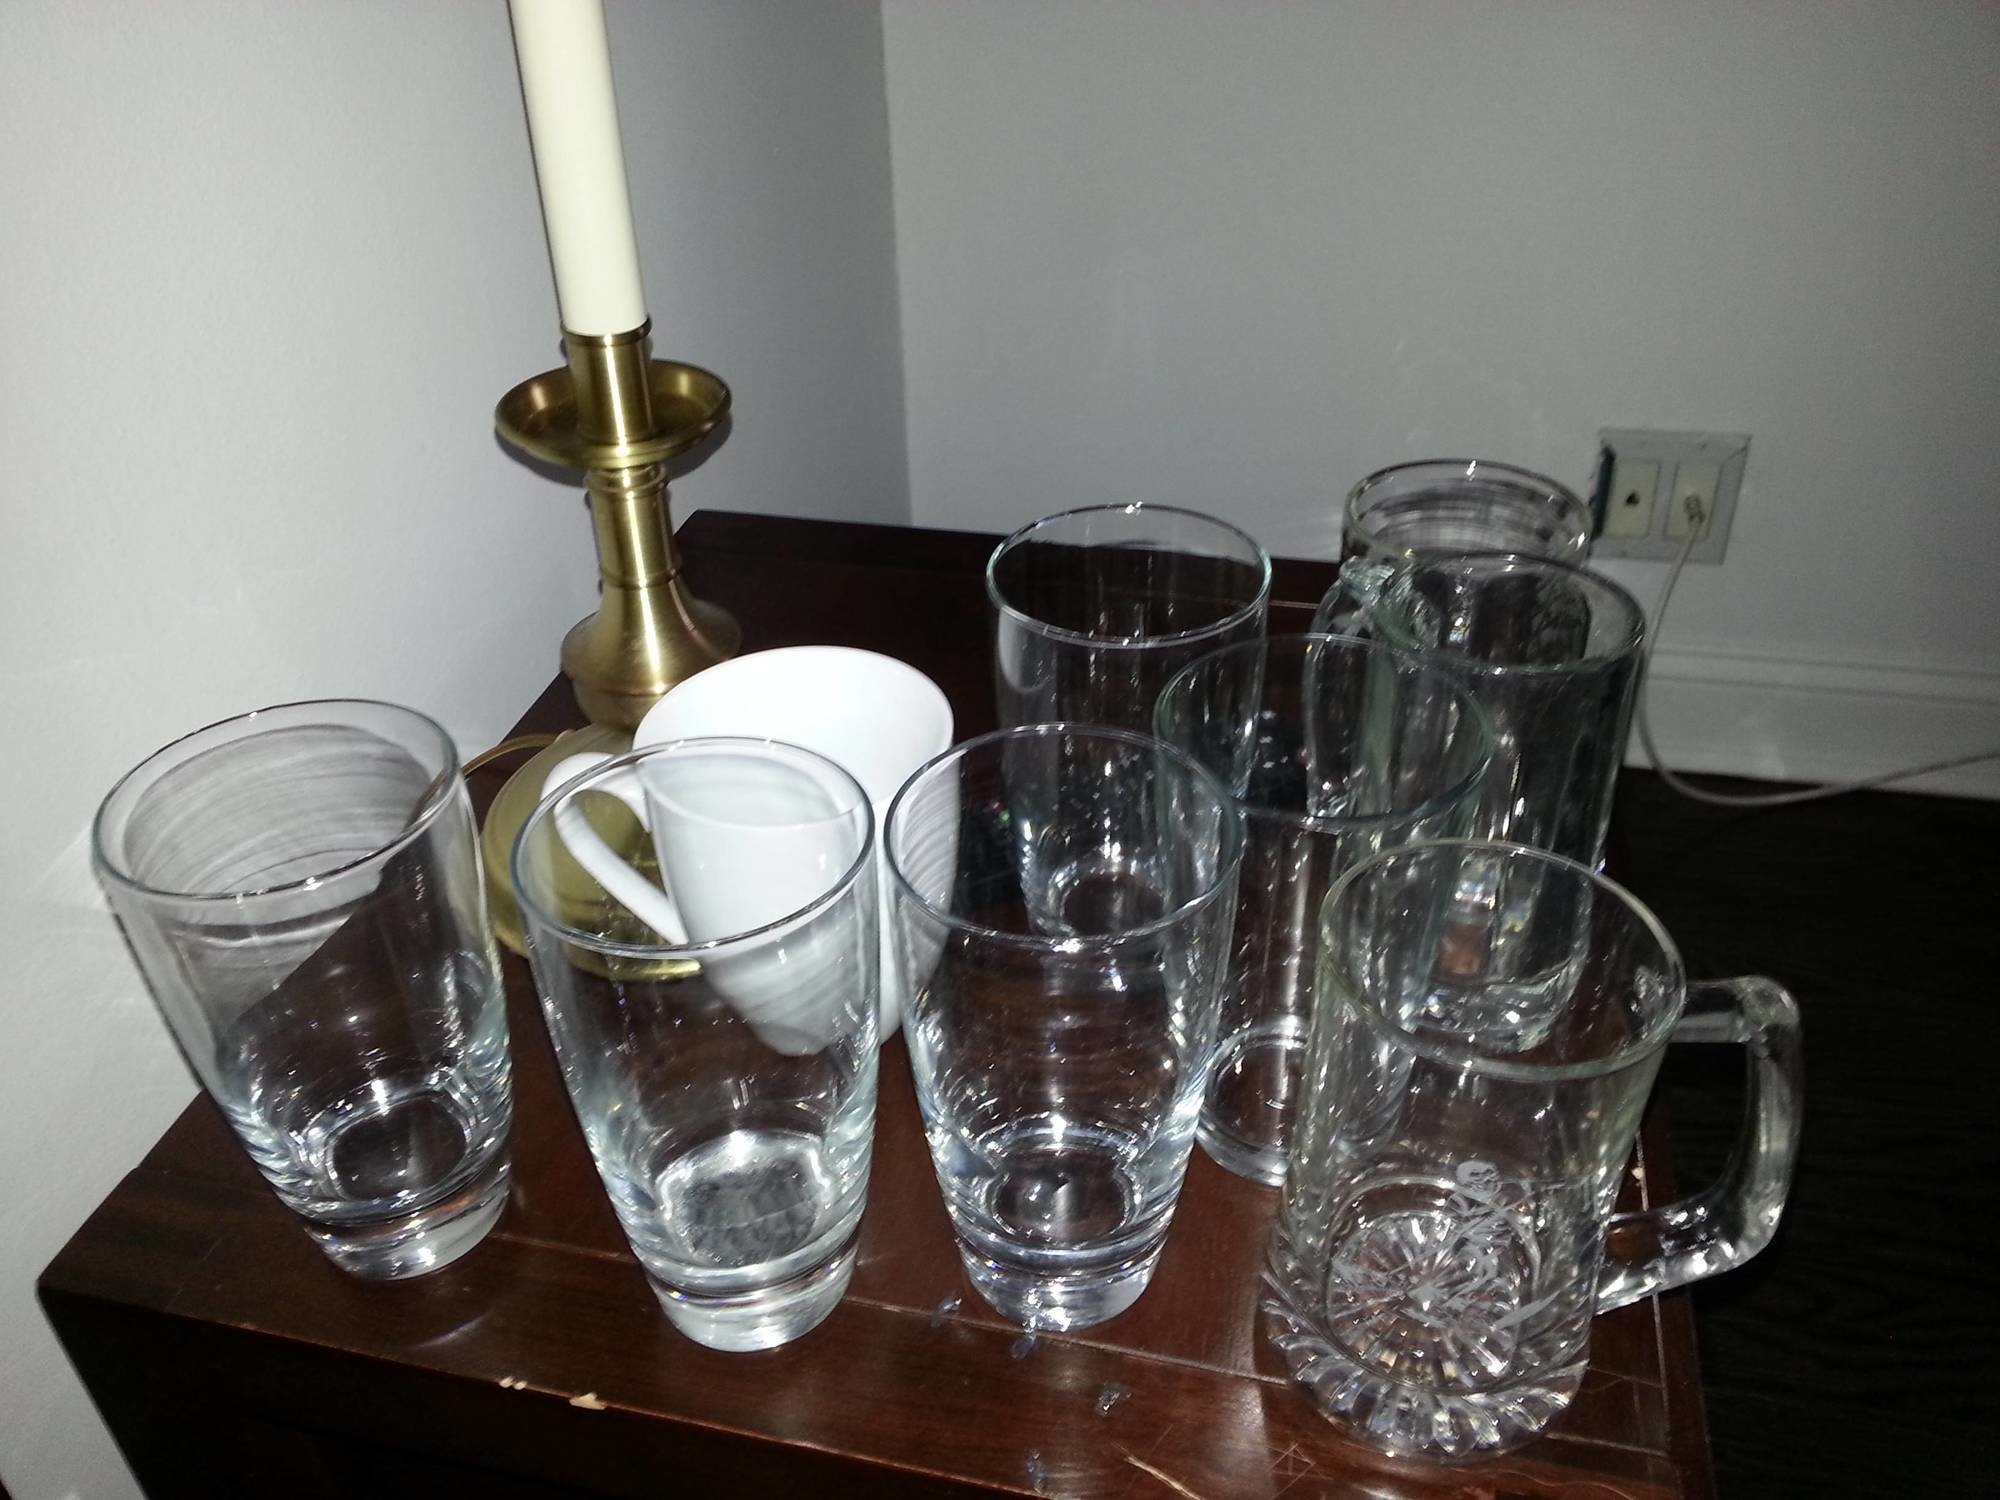 When drunk you literally brings up nine cups of water for sober you in the morning.